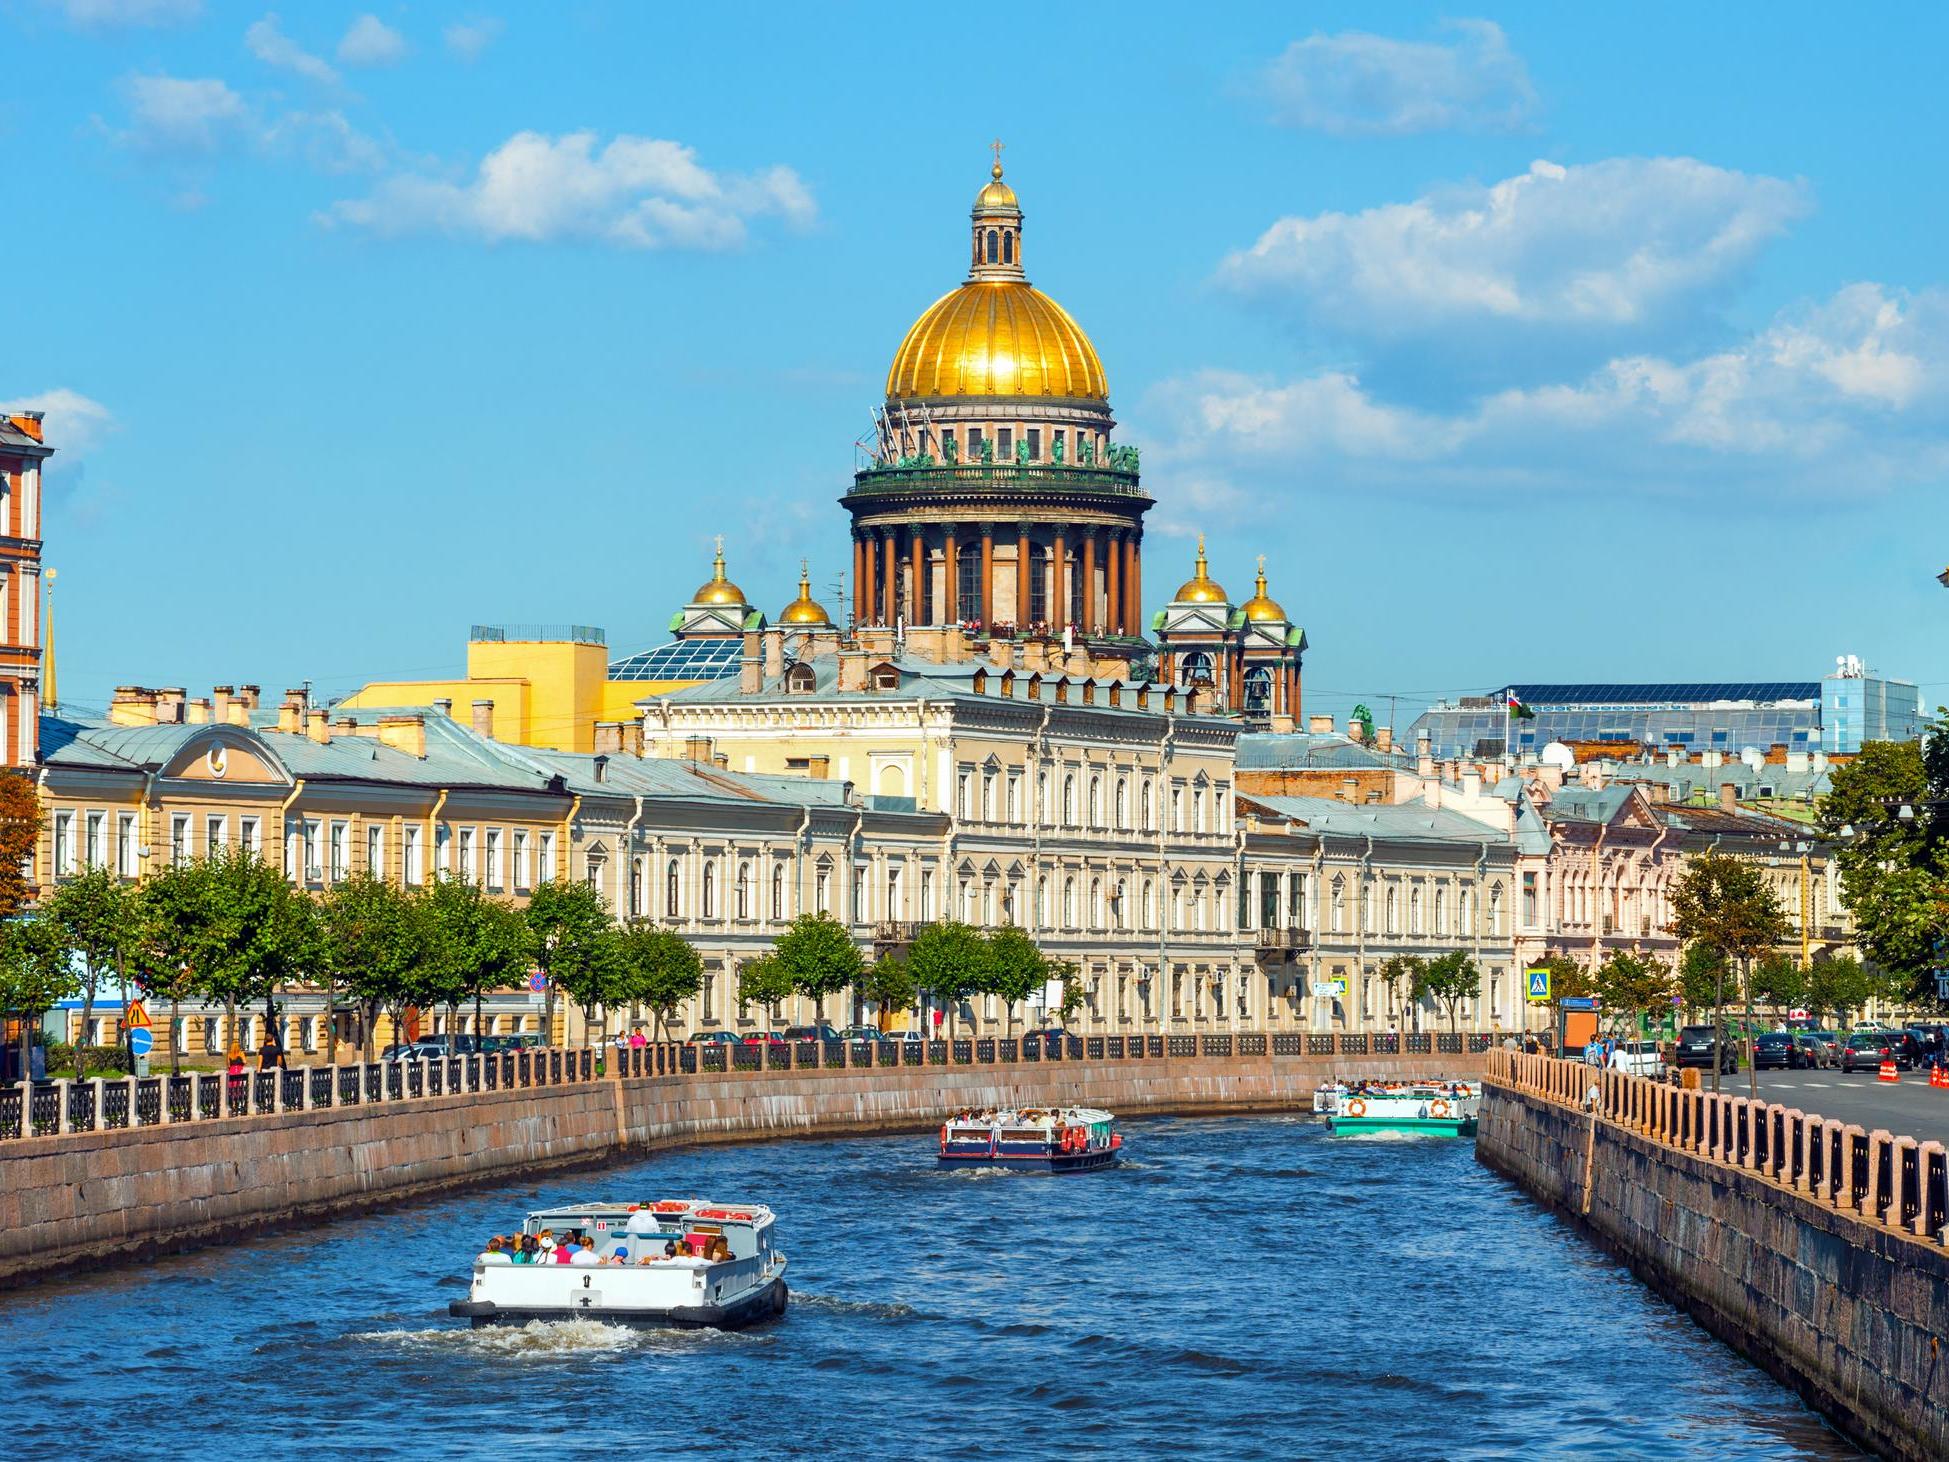 St Petersburg is particularly bright and beautiful in early summer